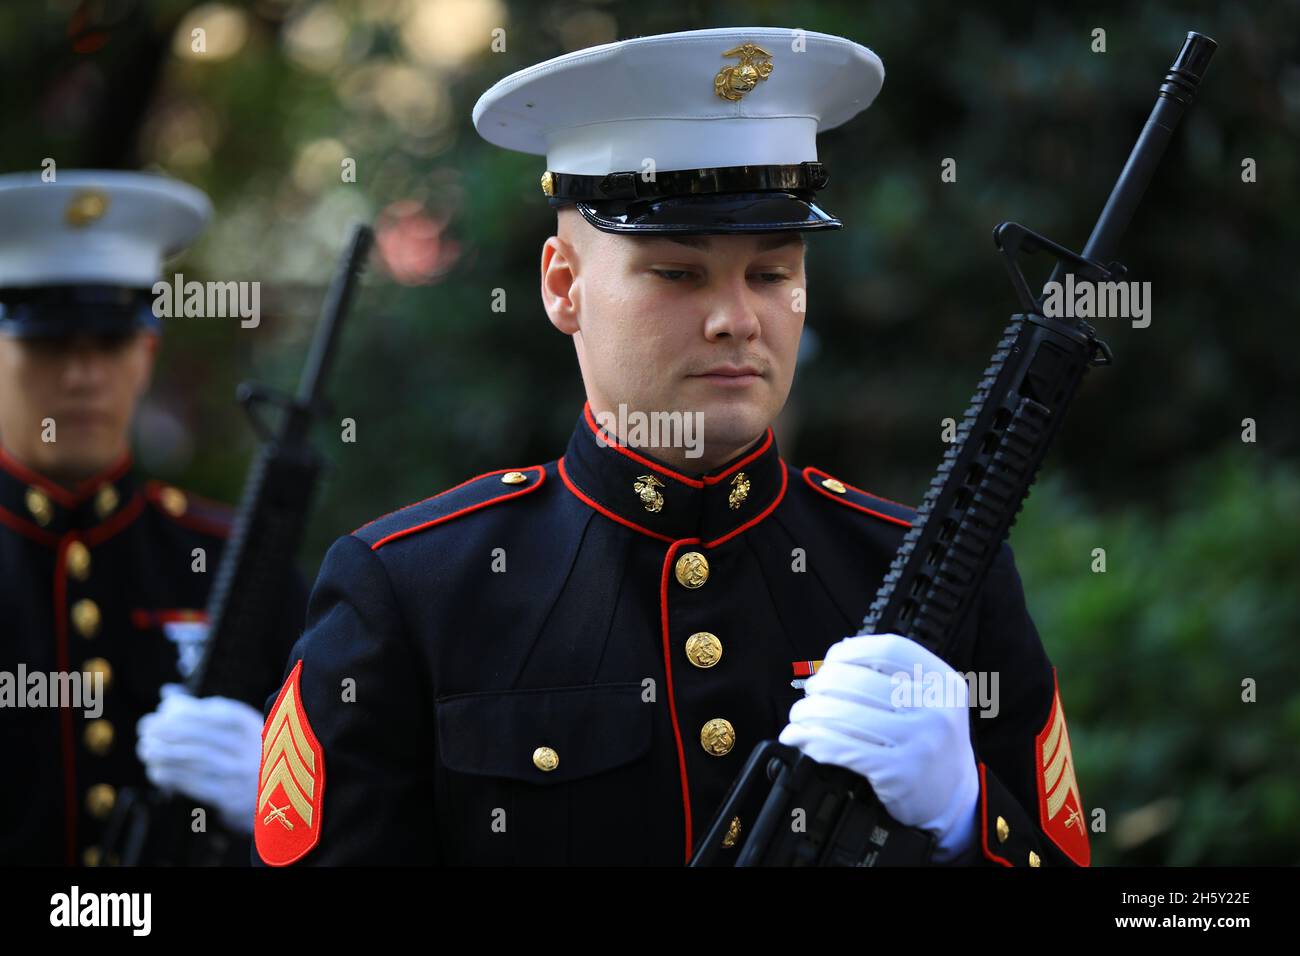 New York, N.Y/USA – 11th Nov. 2021: Marines standing to attention as part of the Veterans Day Parade in New York City on Nov. 11, 2021. (Credit: Gordon Donovan/Alamy Live News) Stock Photo